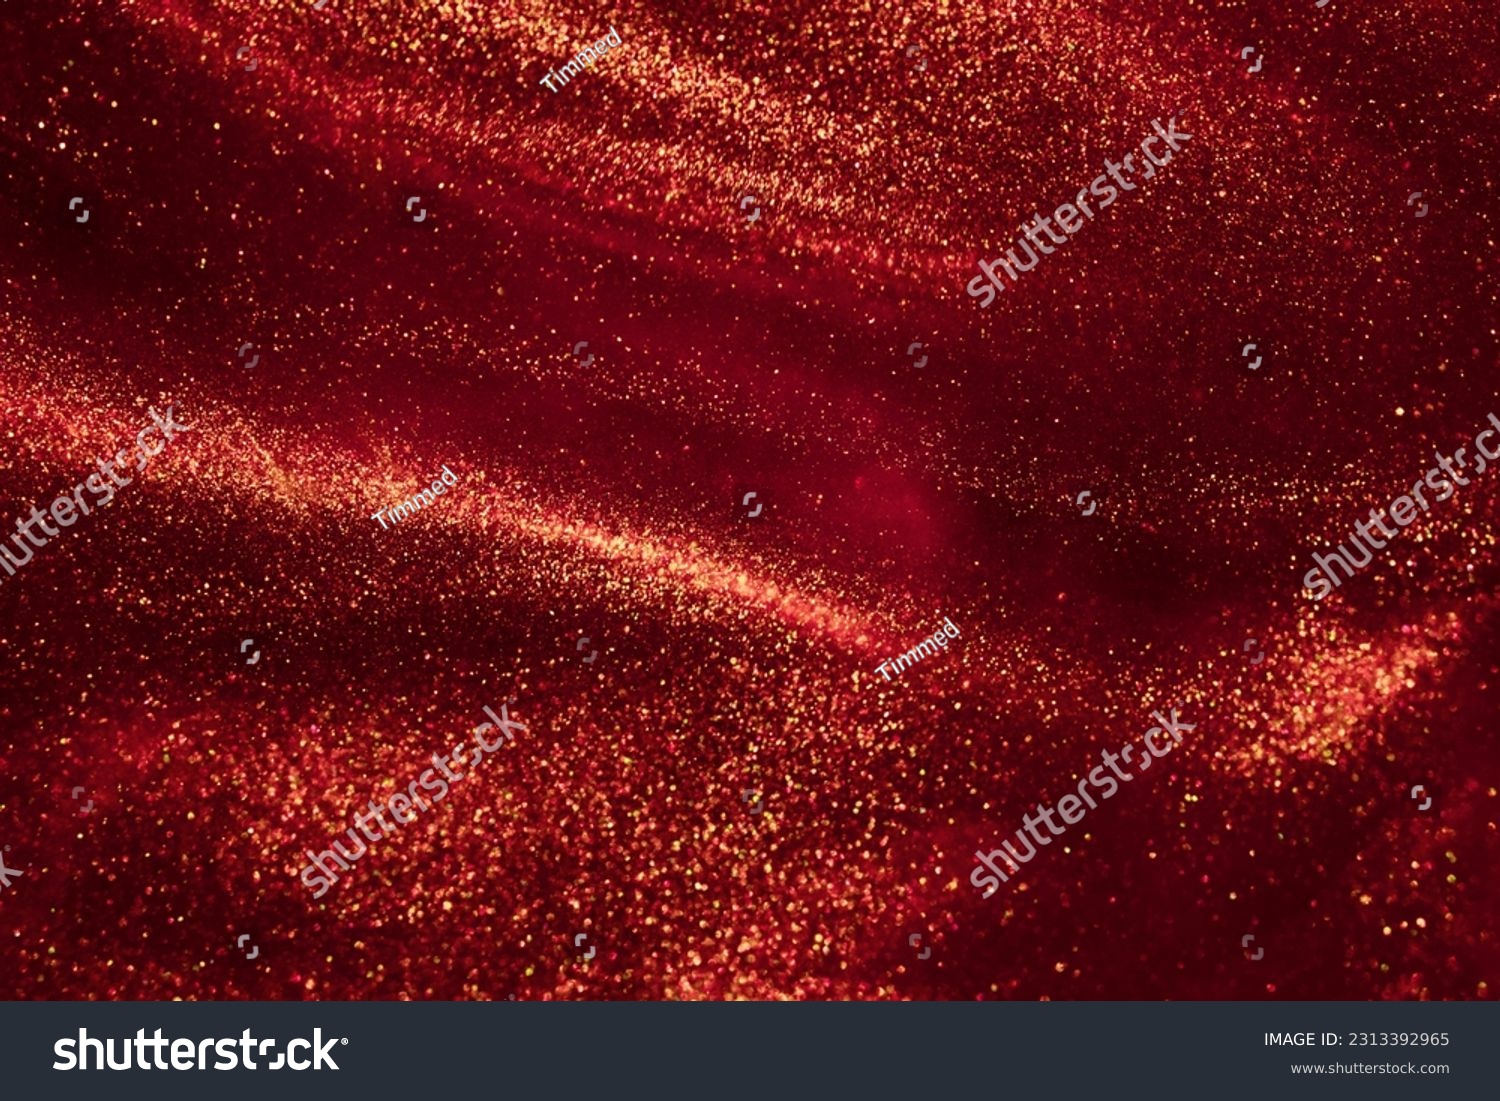 Magic Galaxy of golden dust particles in red fluid. Various stains and overflows of gold particles with burgundy tints. Fantastically beautiful abstract background. #2313392965